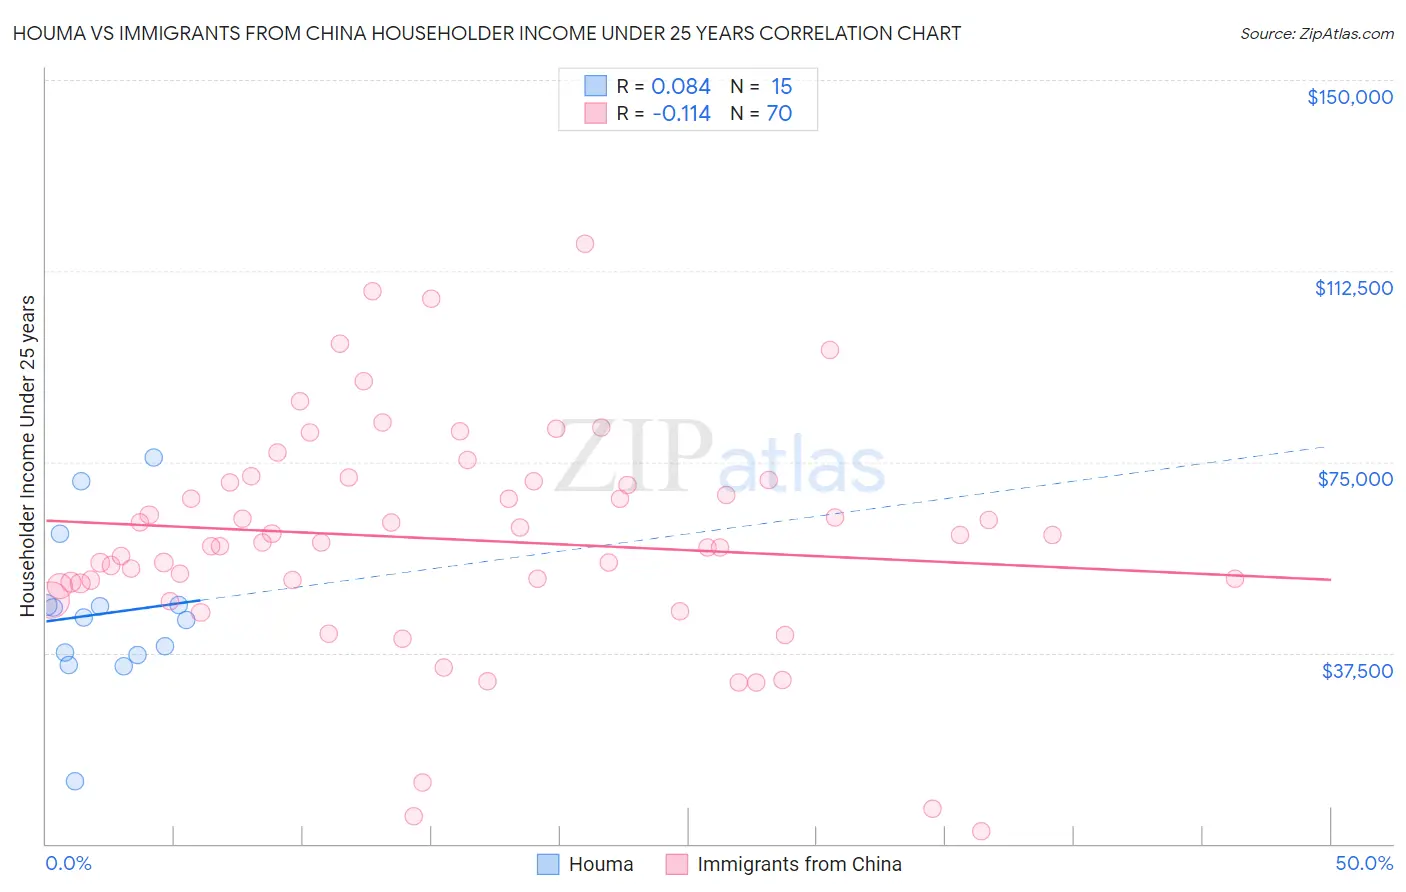 Houma vs Immigrants from China Householder Income Under 25 years